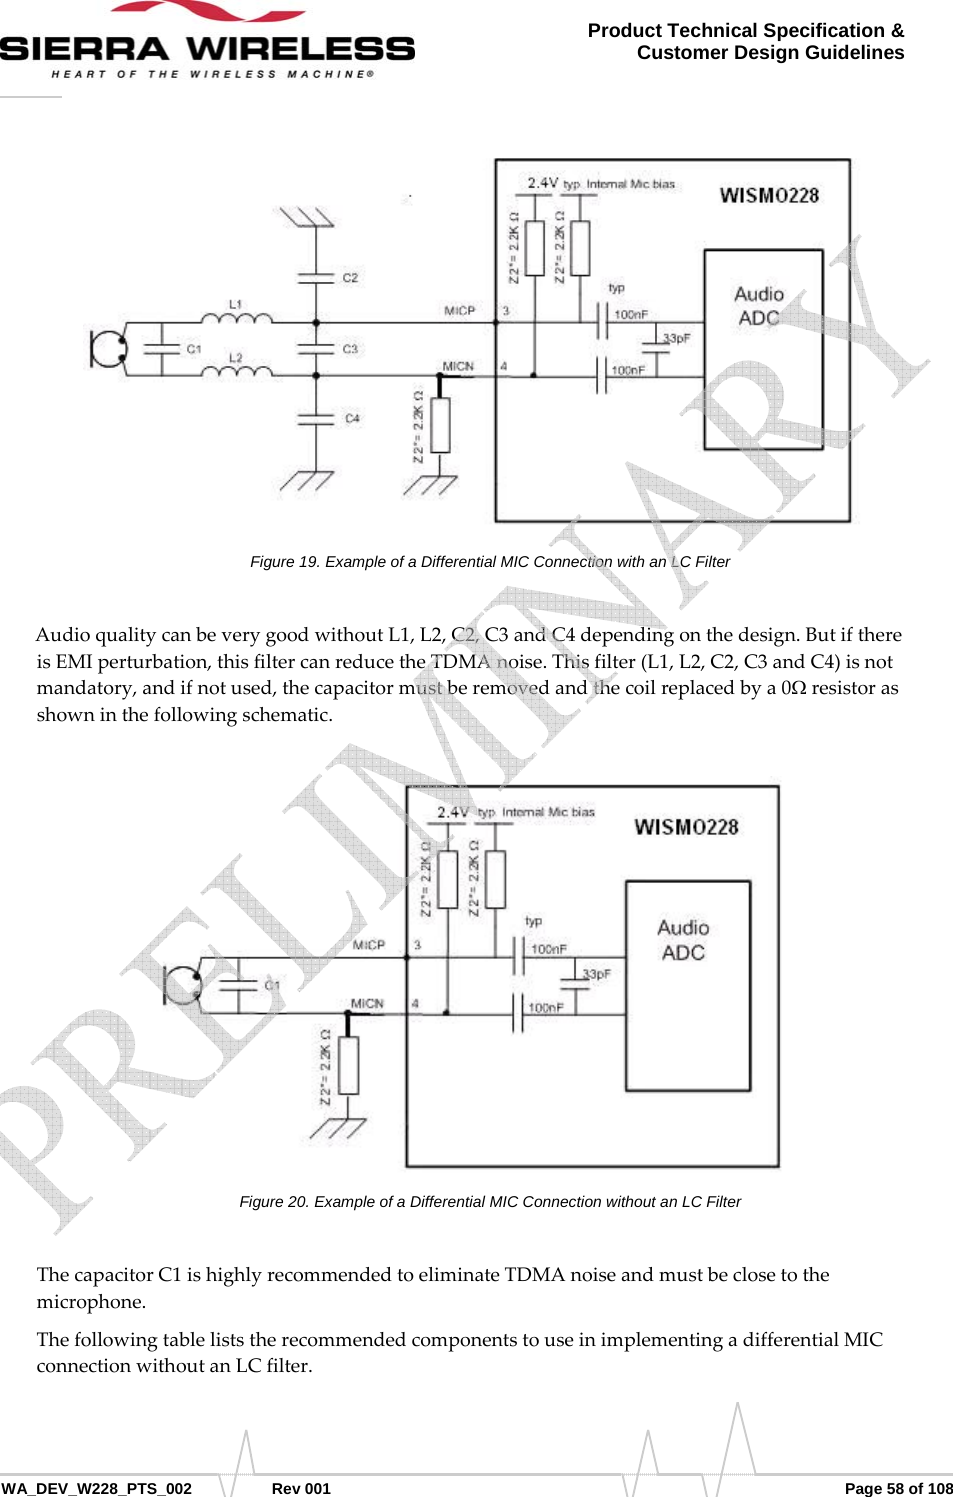      WA_DEV_W228_PTS_002 Rev 001  Page 58 of 108 Product Technical Specification &amp; Customer Design Guidelines Figure 19. Example of a Differential MIC Connection with an LC Filter AudioqualitycanbeverygoodwithoutL1,L2,C2,C3andC4dependingonthedesign.ButifthereisEMIperturbation,thisfiltercanreducetheTDMAnoise.Thisfilter(L1,L2,C2,C3andC4)isnotmandatory,andifnotused,thecapacitormustberemovedandthecoilreplacedbya0Ωresistorasshowninthefollowingschematic.Figure 20. Example of a Differential MIC Connection without an LC Filter ThecapacitorC1ishighlyrecommendedtoeliminateTDMAnoiseandmustbeclosetothemicrophone.ThefollowingtableliststherecommendedcomponentstouseinimplementingadifferentialMICconnectionwithoutanLCfilter.   